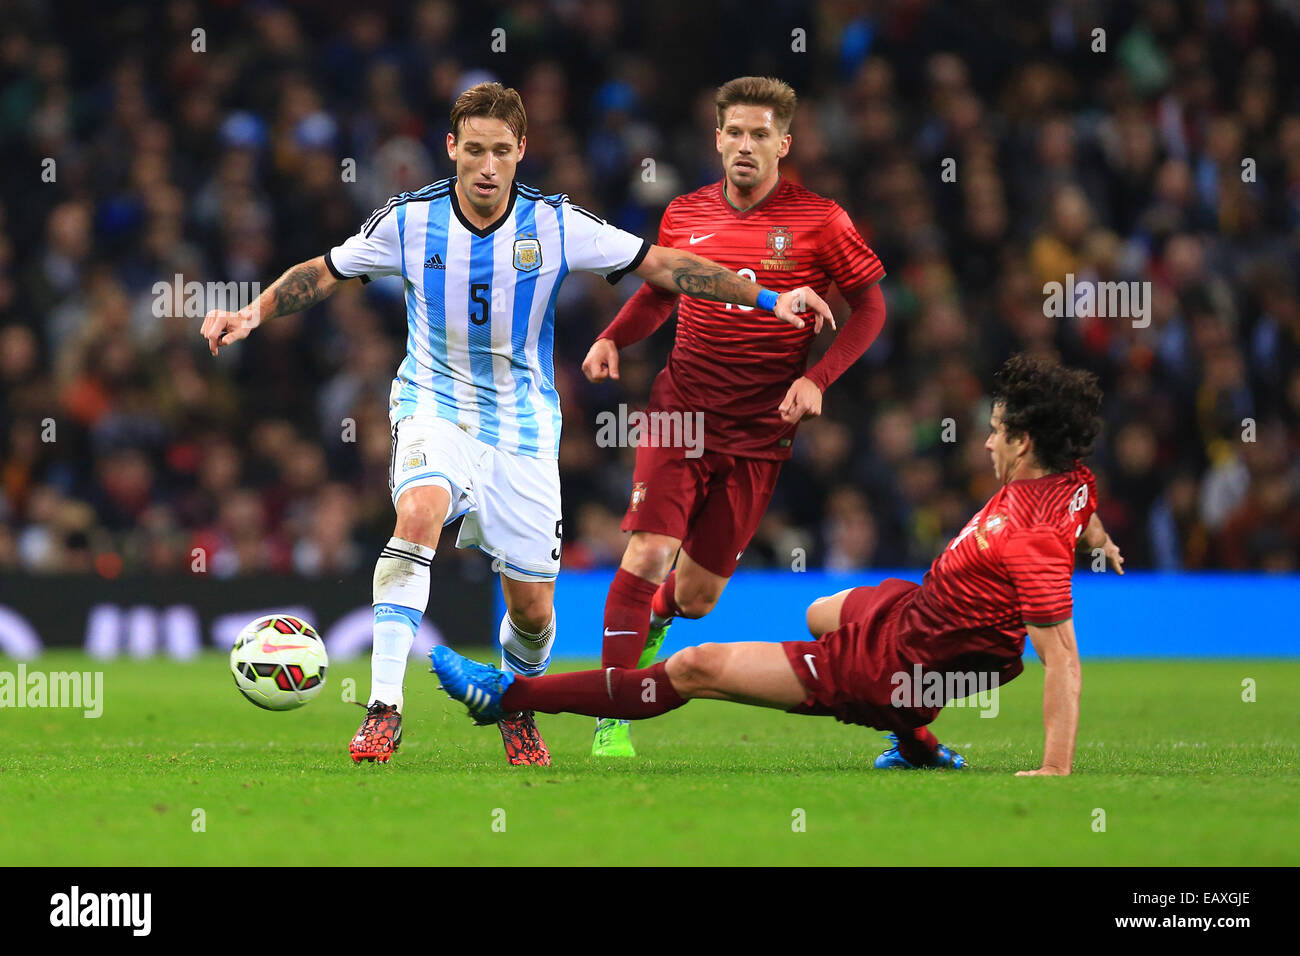 Nov. 18, 2014 - Manchester, United Kingdom - Tiago Mendes of Portugal challenges Lucas Biglia of Argentina - Argentina vs. Portugal - International Friendly - Old Trafford - Manchester - 18/11/2014 Pic Philip Oldham/Sportimage. Stock Photo